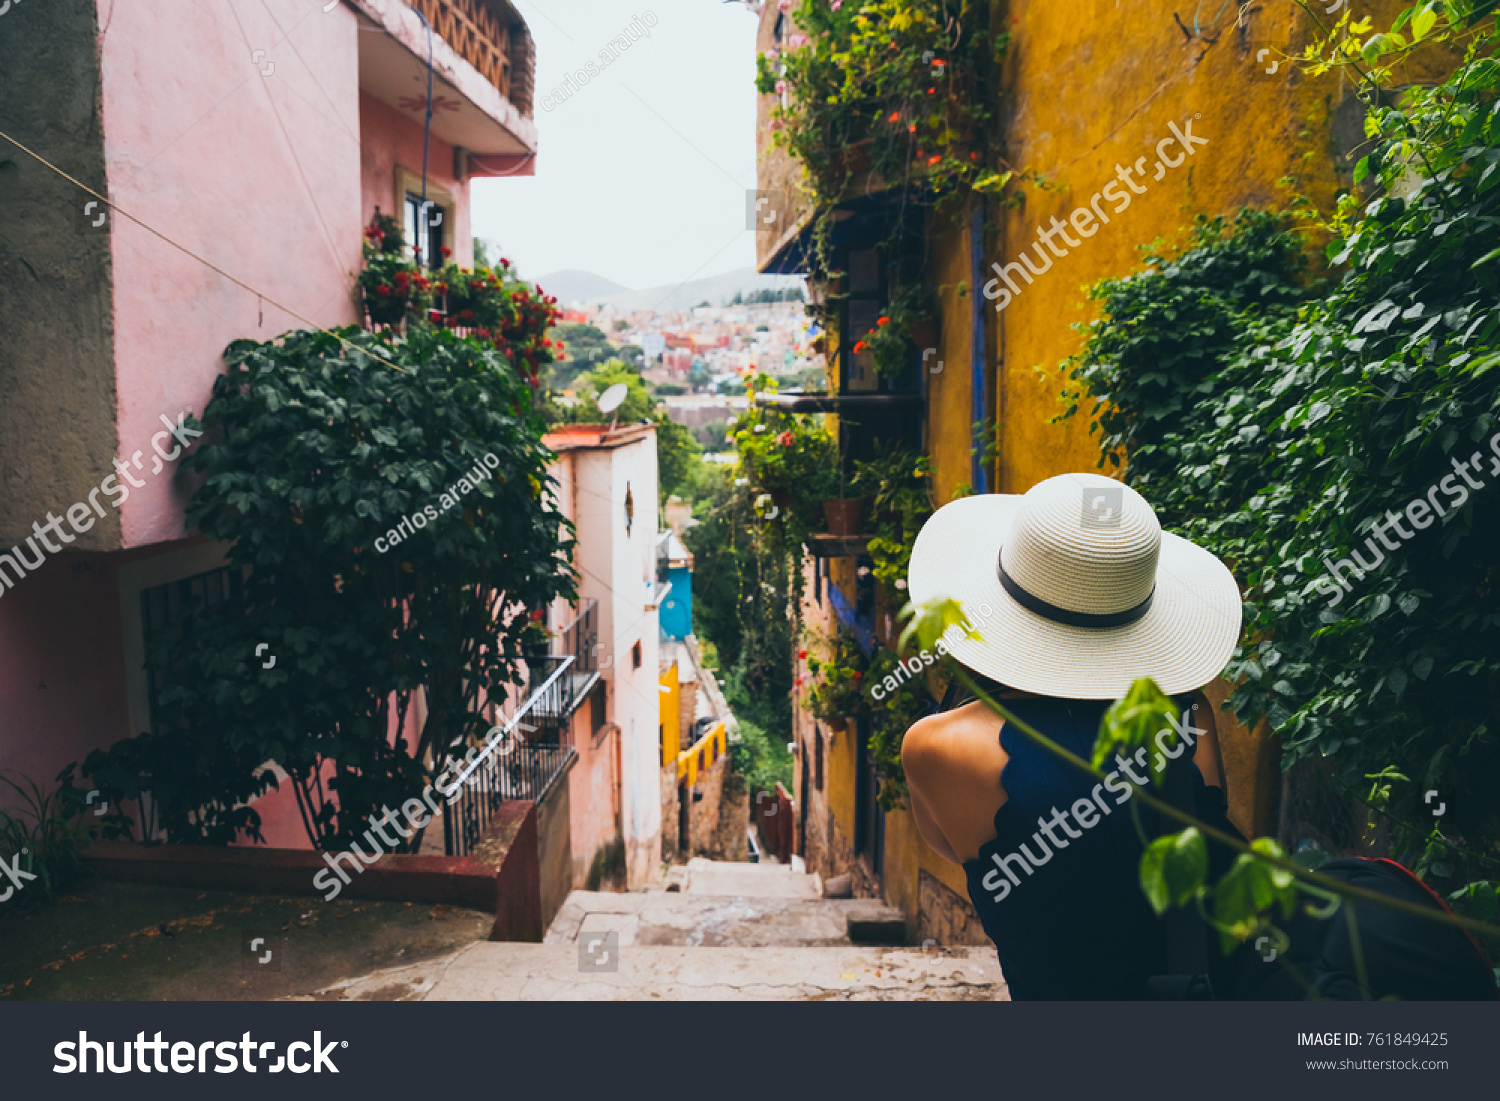 Woman with a hat sitting in a Guanajuato alley enjoying the view of the town #761849425